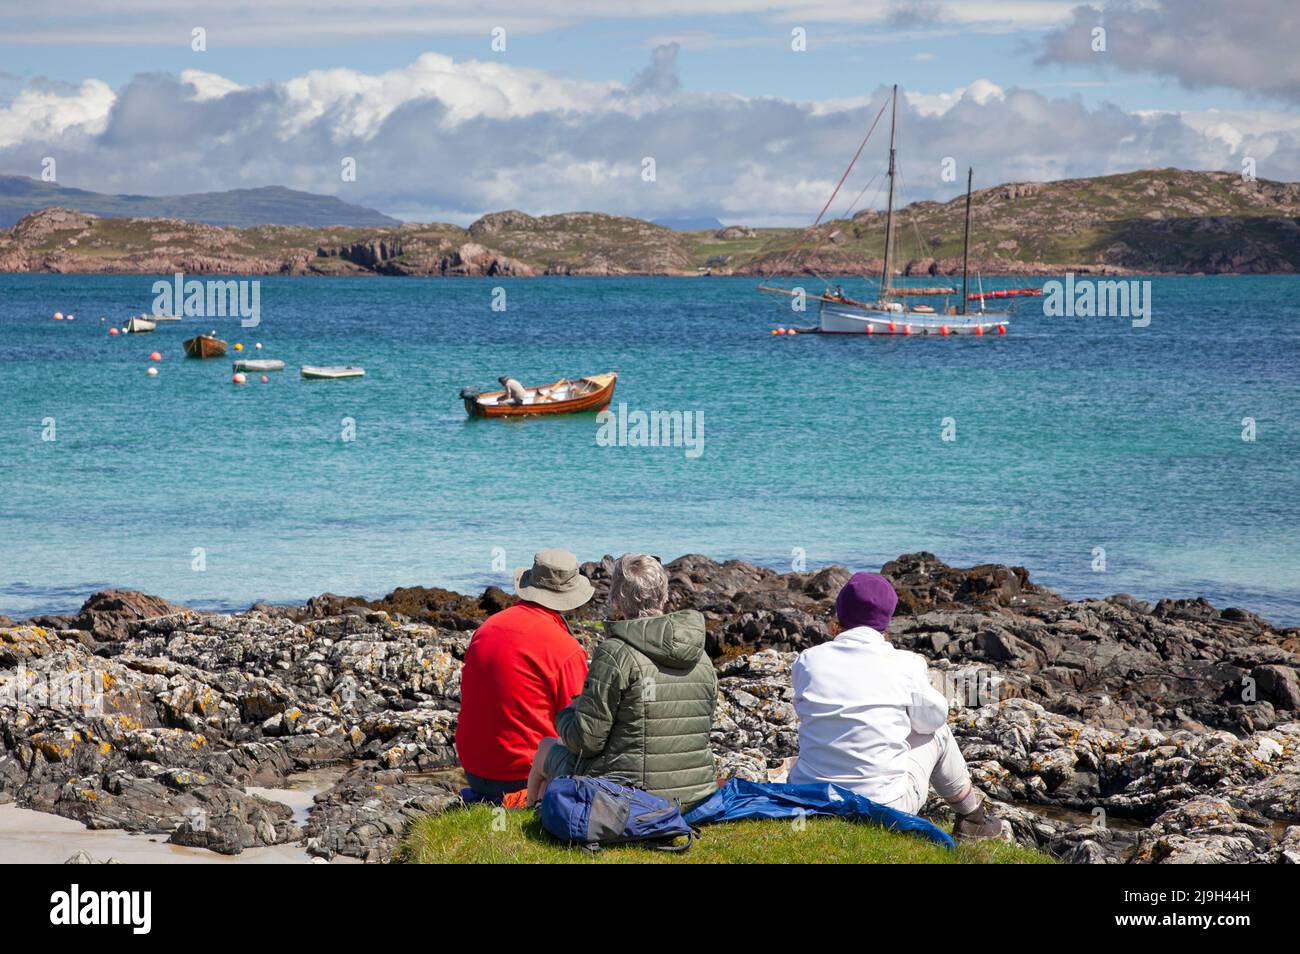 Isle of Iona, Inner Hebrides, Scotland, UK. 23rd May 2022. Sunny afternoon after morning drizzle, temperature rising to 18 degrees mid-afternoon, slight beeze keeping midges at bay. Pictured: Family havng a pleasant picnic with a beautiful view over Sound of Iona. Credit: Arch White/Alamy Live News. Stock Photo